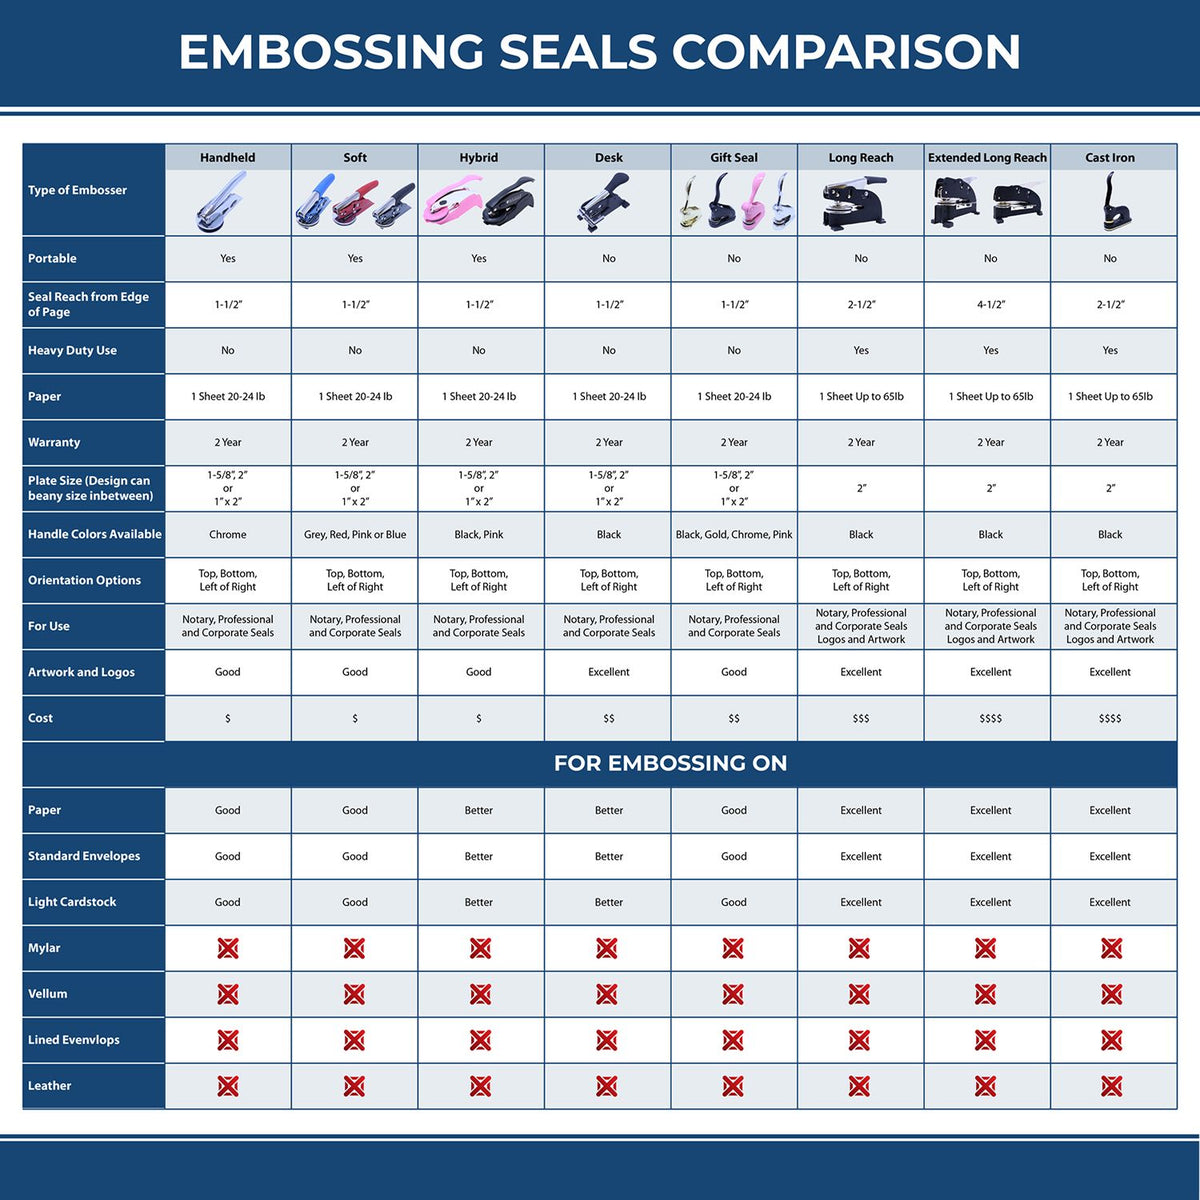 A comparison chart for the different types of mount models available for the Iowa Desk Architect Embossing Seal.